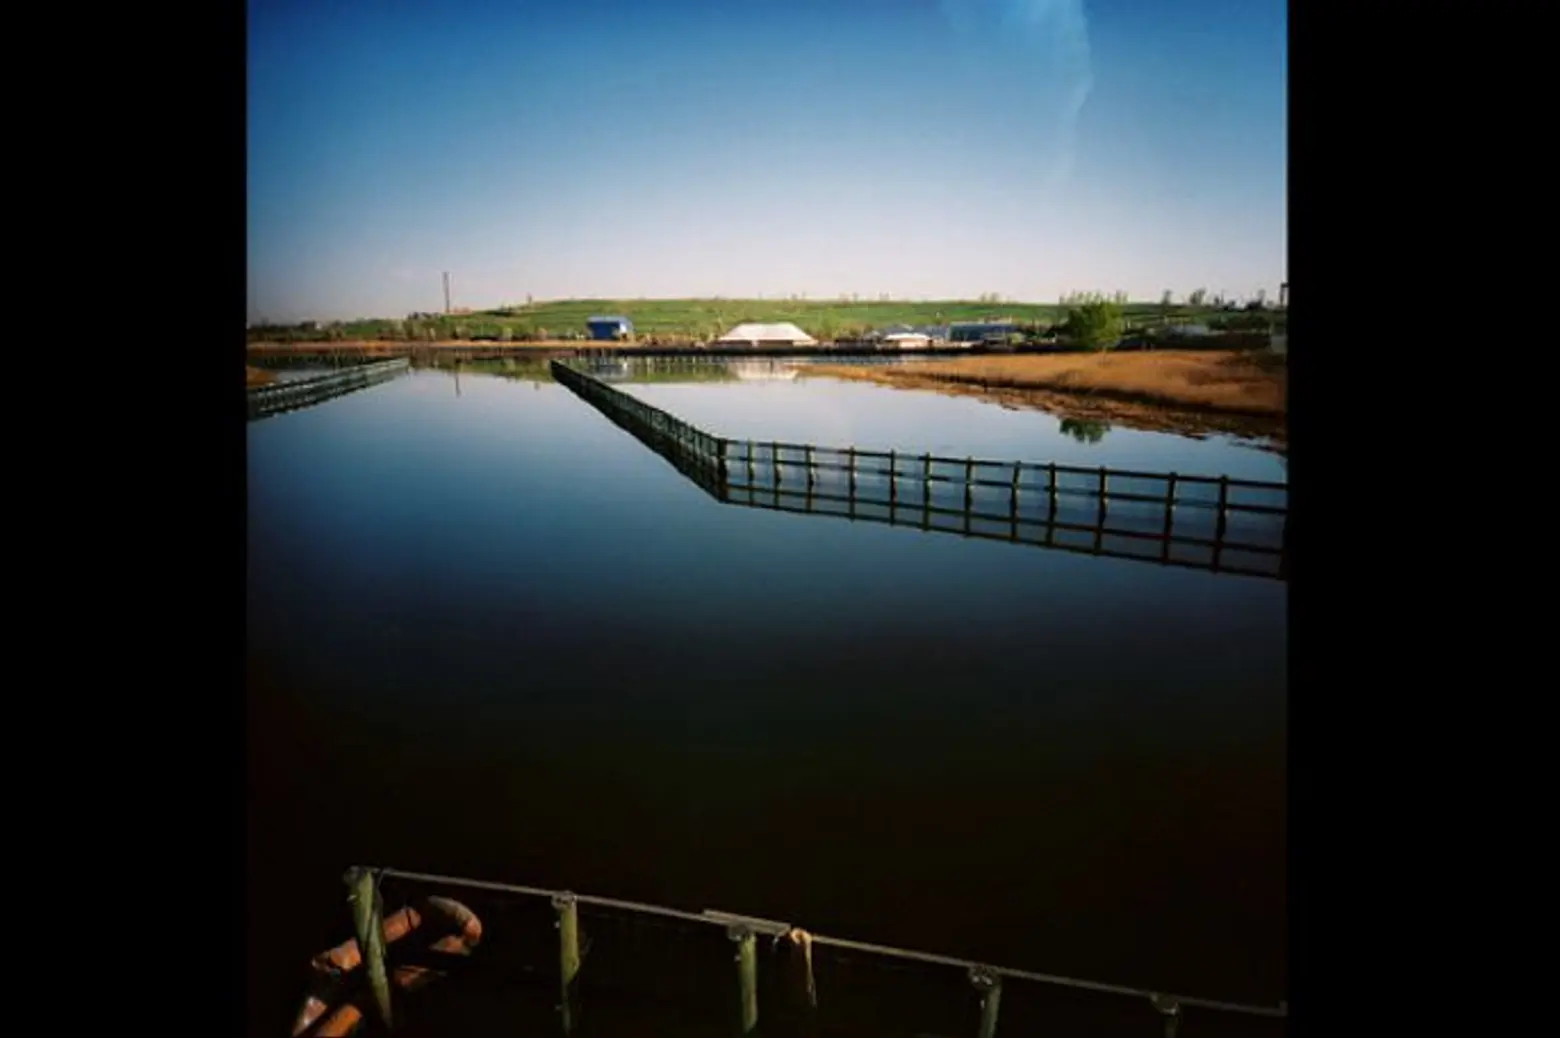 Photographs Document Transformation of Freshkills; Pool Floatie Explodes Like a Jack-in-the-Box